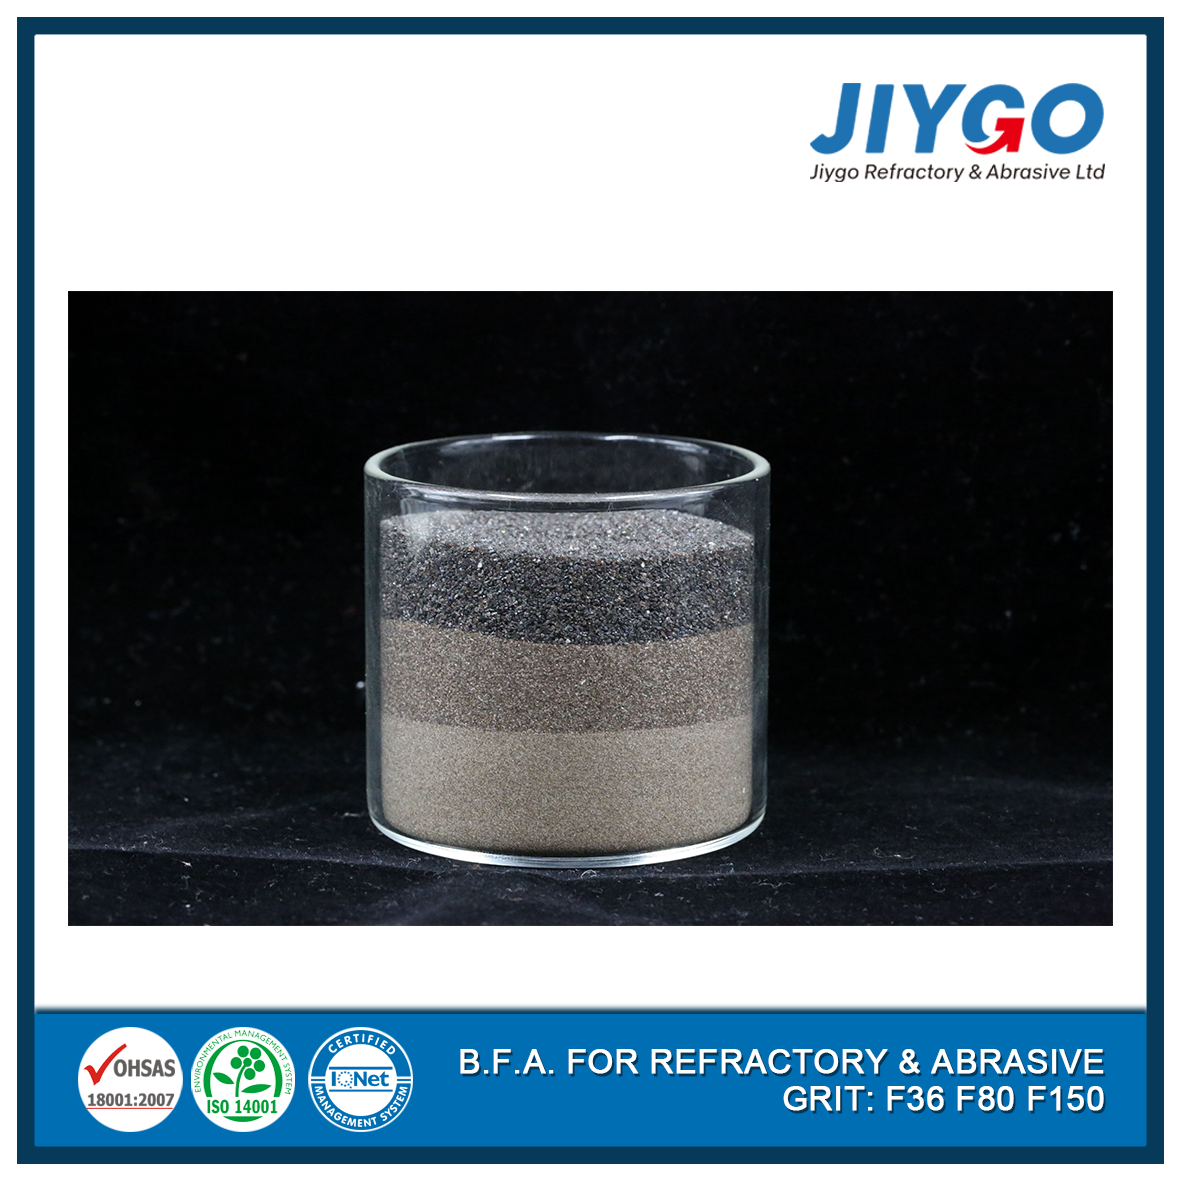 Jiygo BFA F36 F80 F150 for Refractory & Abrasive.png